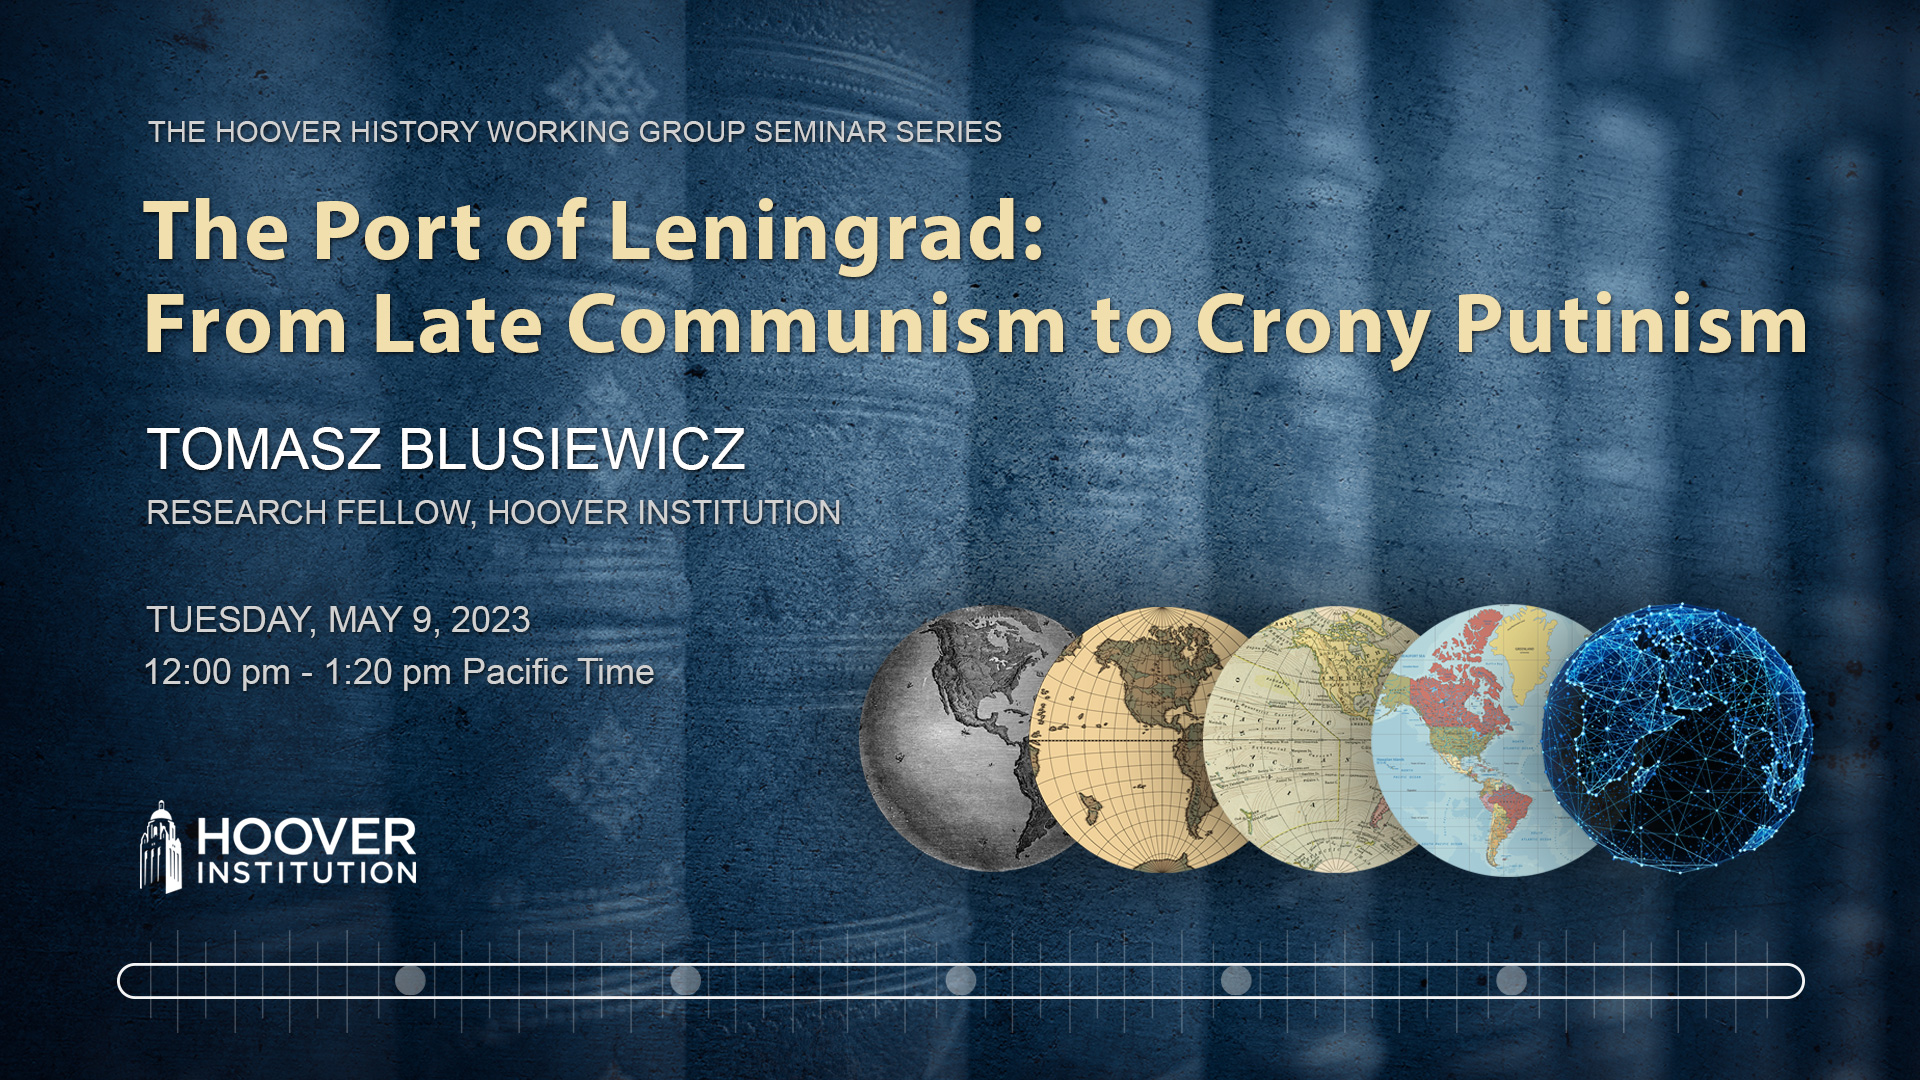 The Port of Leningrad: From Late Communism to Crony Putinism